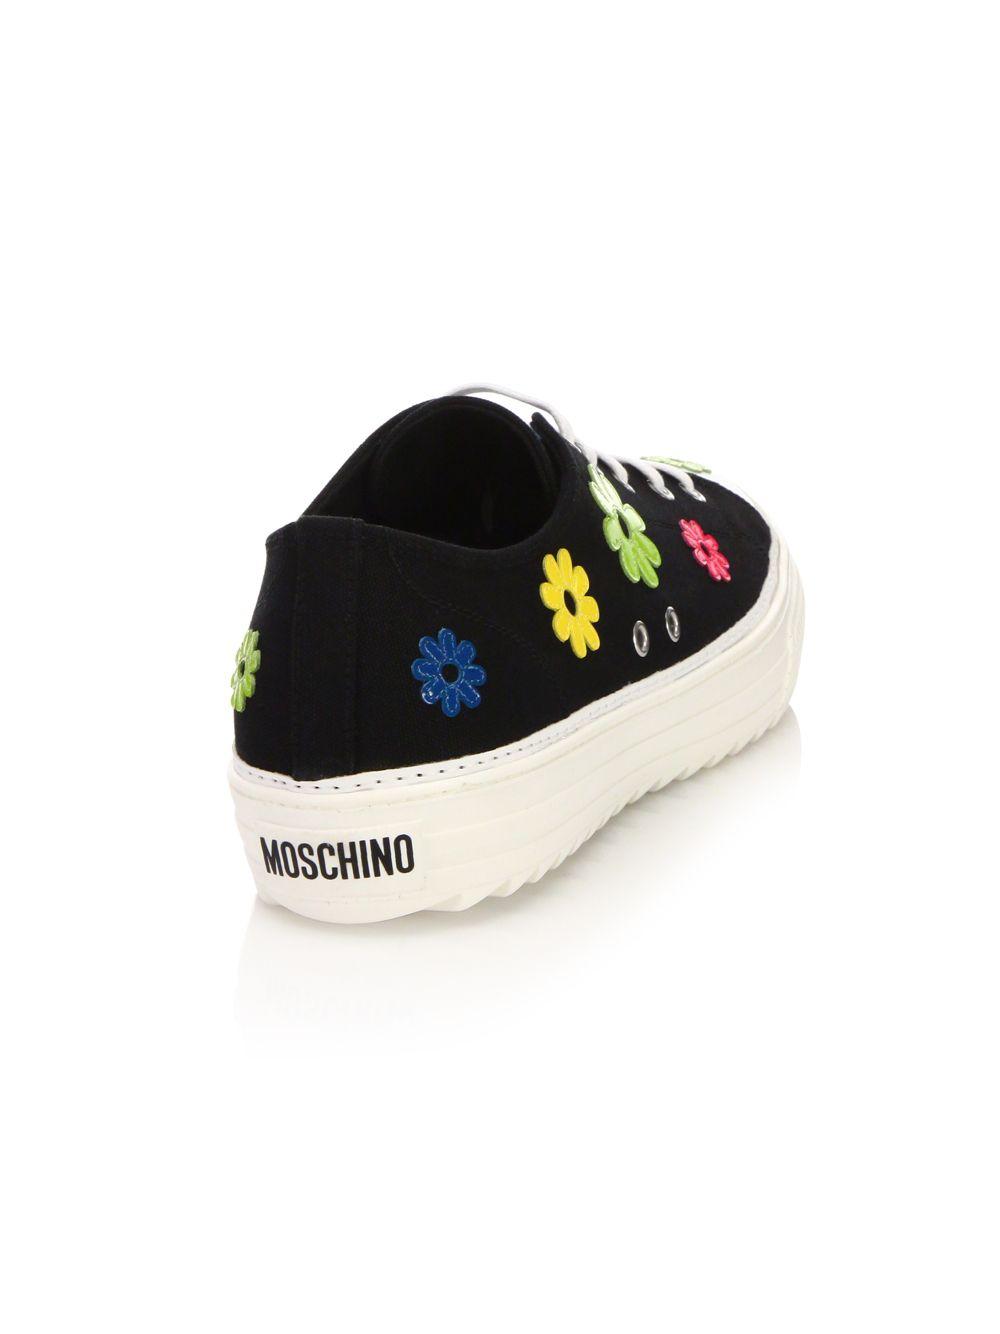 Moschino Canvas Flower Low-top Sneakers in Black | Lyst